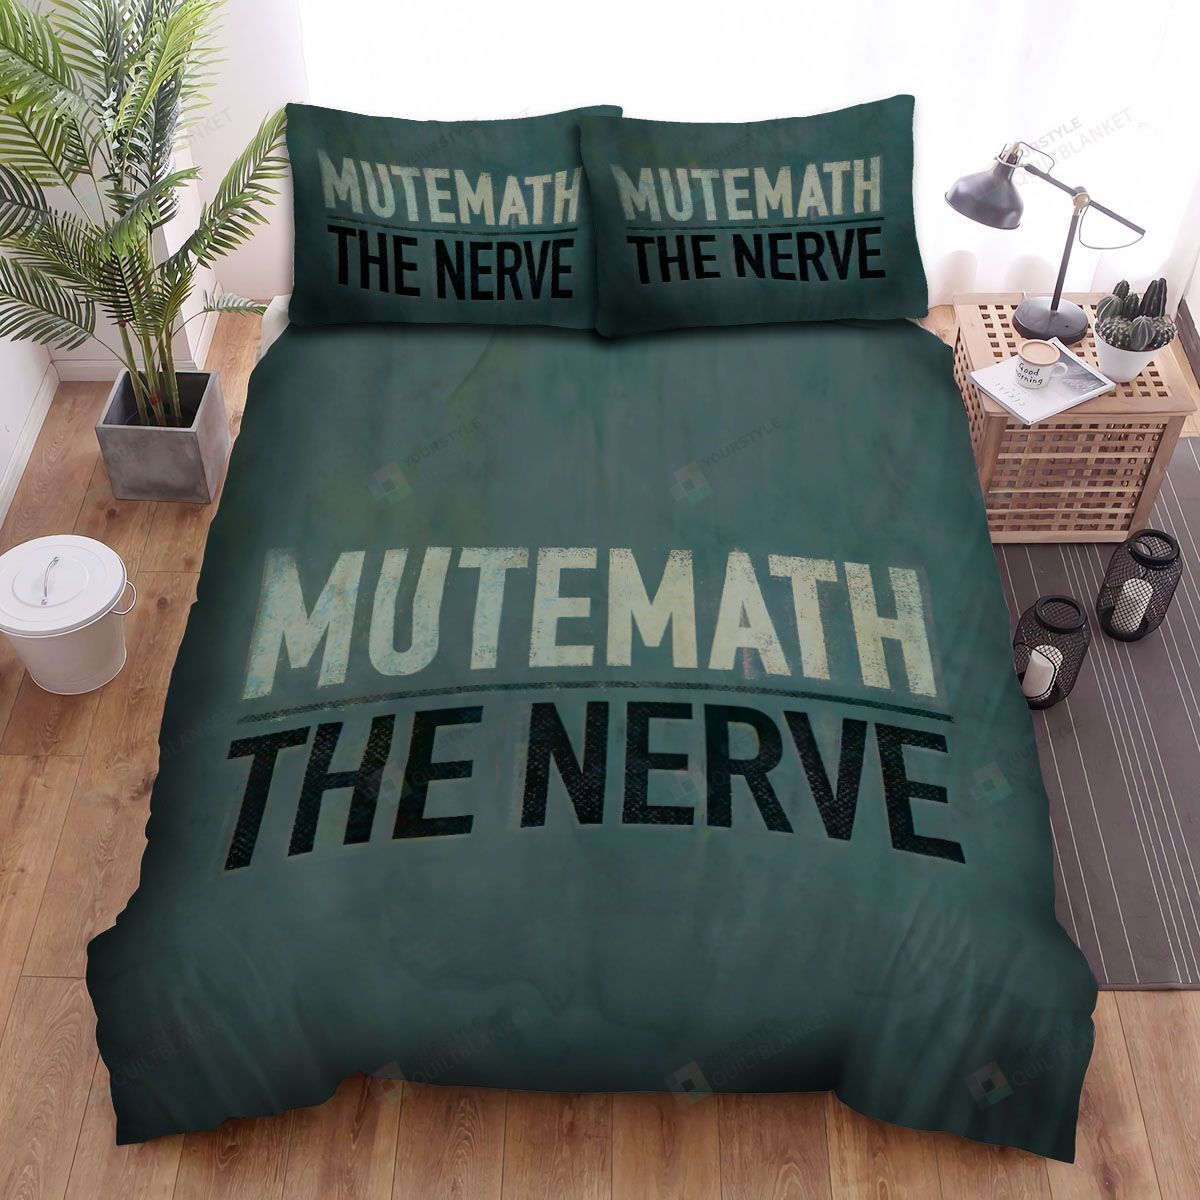 Mutemath The Nerve Bed Sheets Spread Comforter Duvet Cover Bedding Sets